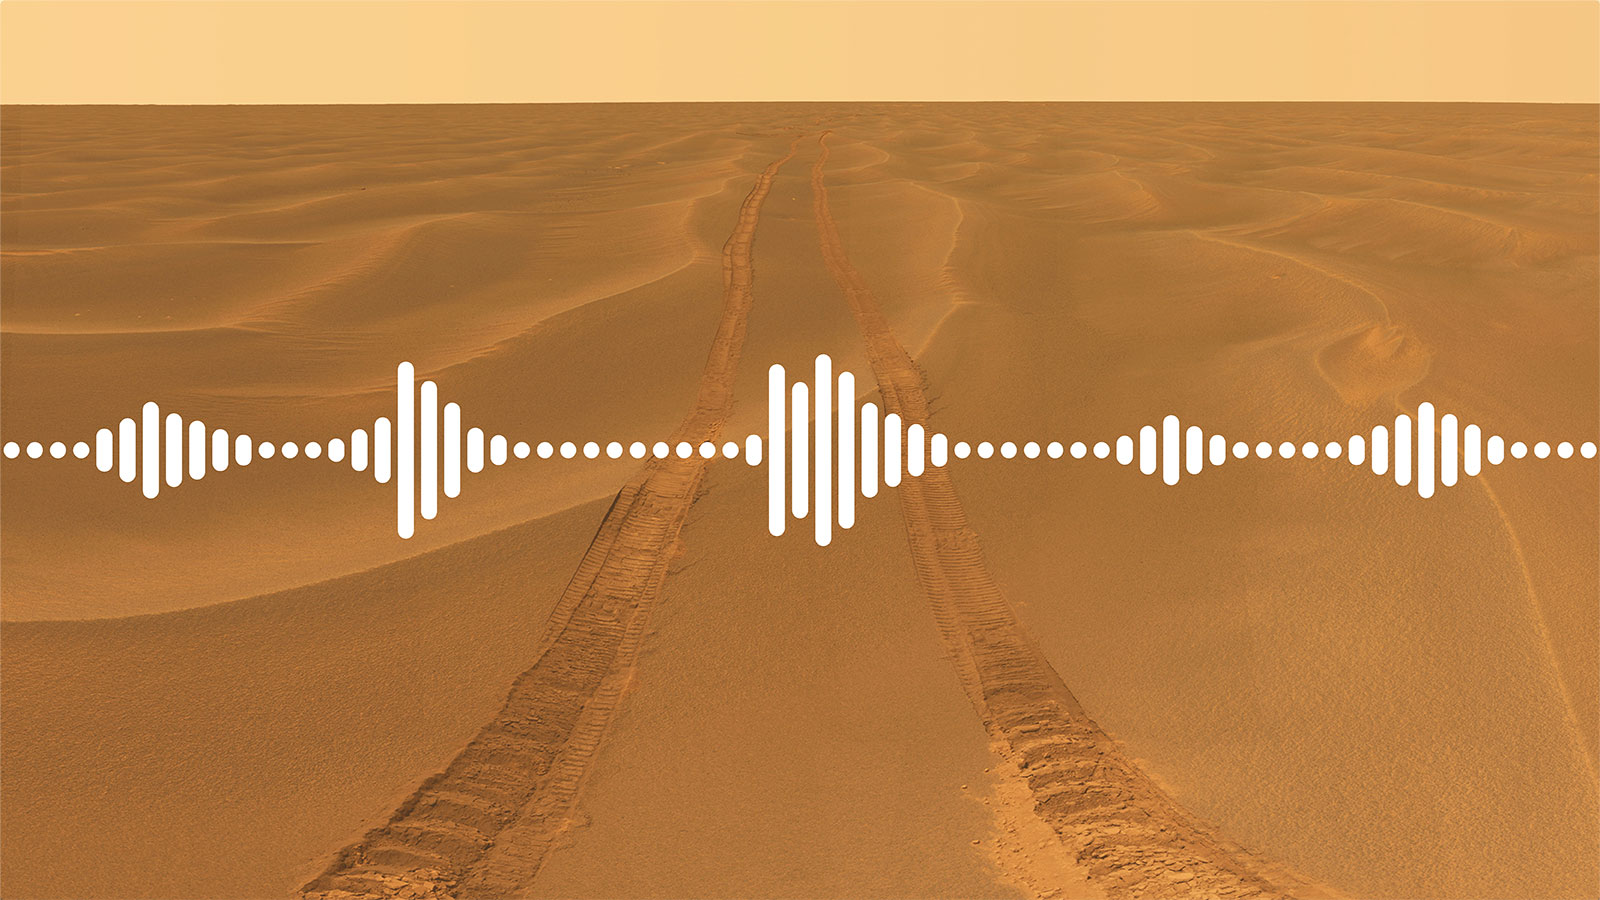 This is how sound changes on Mars.